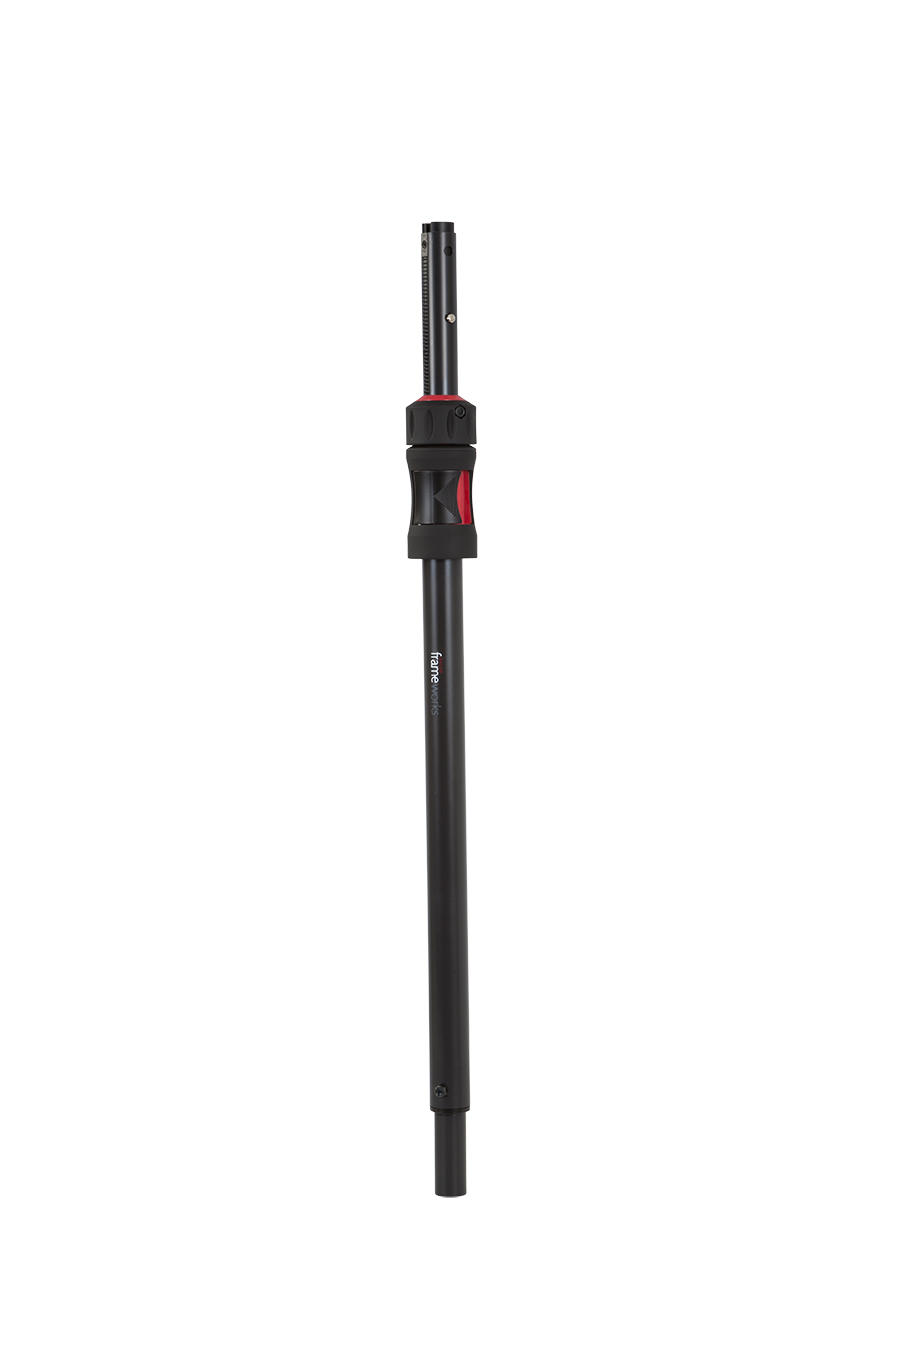 Pair of ID Sub Poles with Carry Bag-GFW-ID-SPKR-SPSET